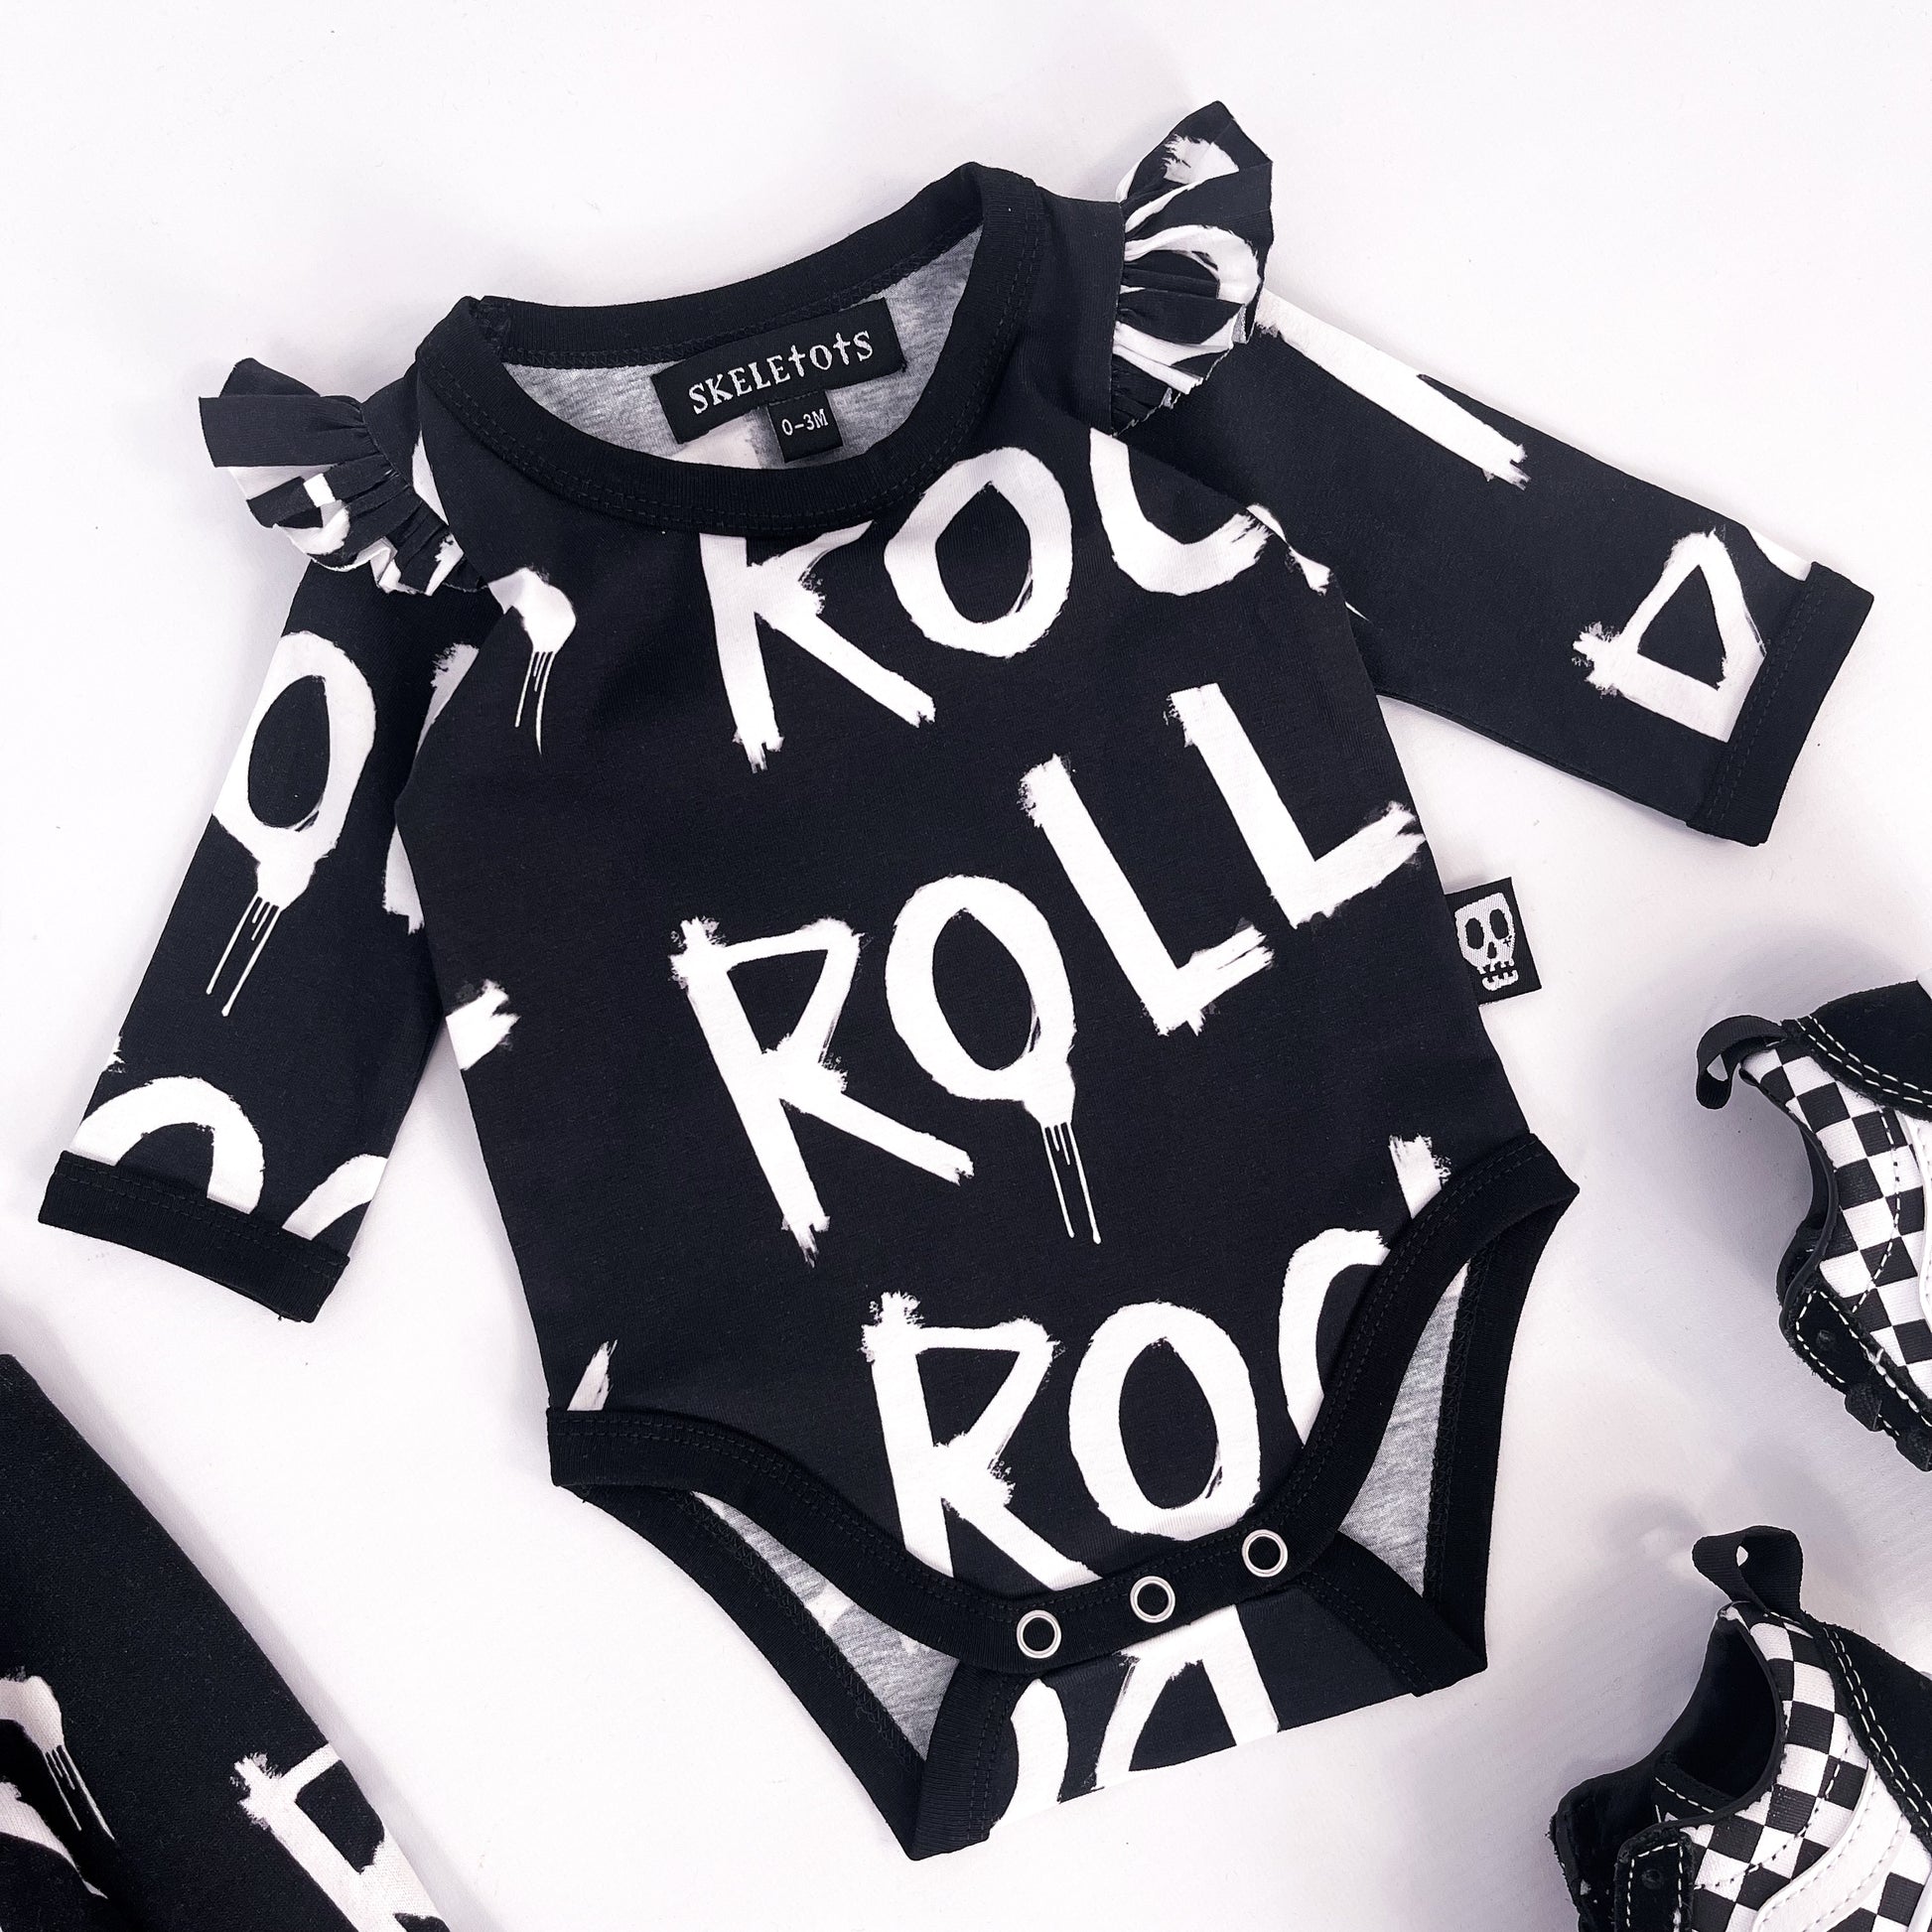 Baby's bodysuit with frilled shoulder details, pressed stud fasteners and the words "rock" and "roll" printed on